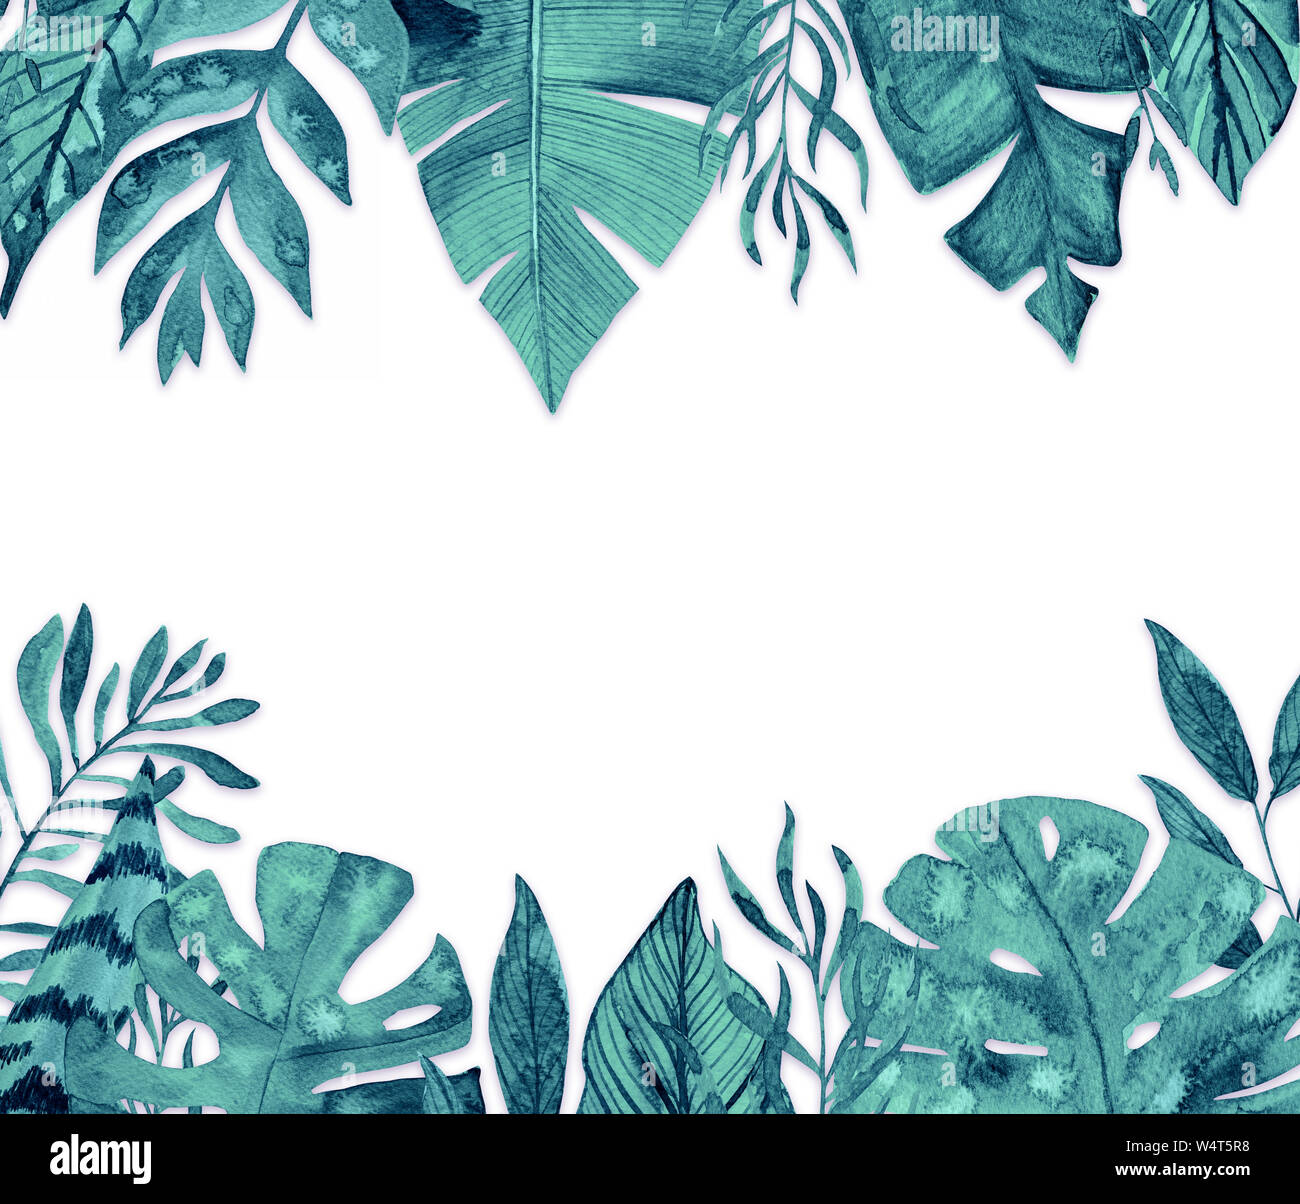 Watercolor tropical leaves frame on white background Stock Photo